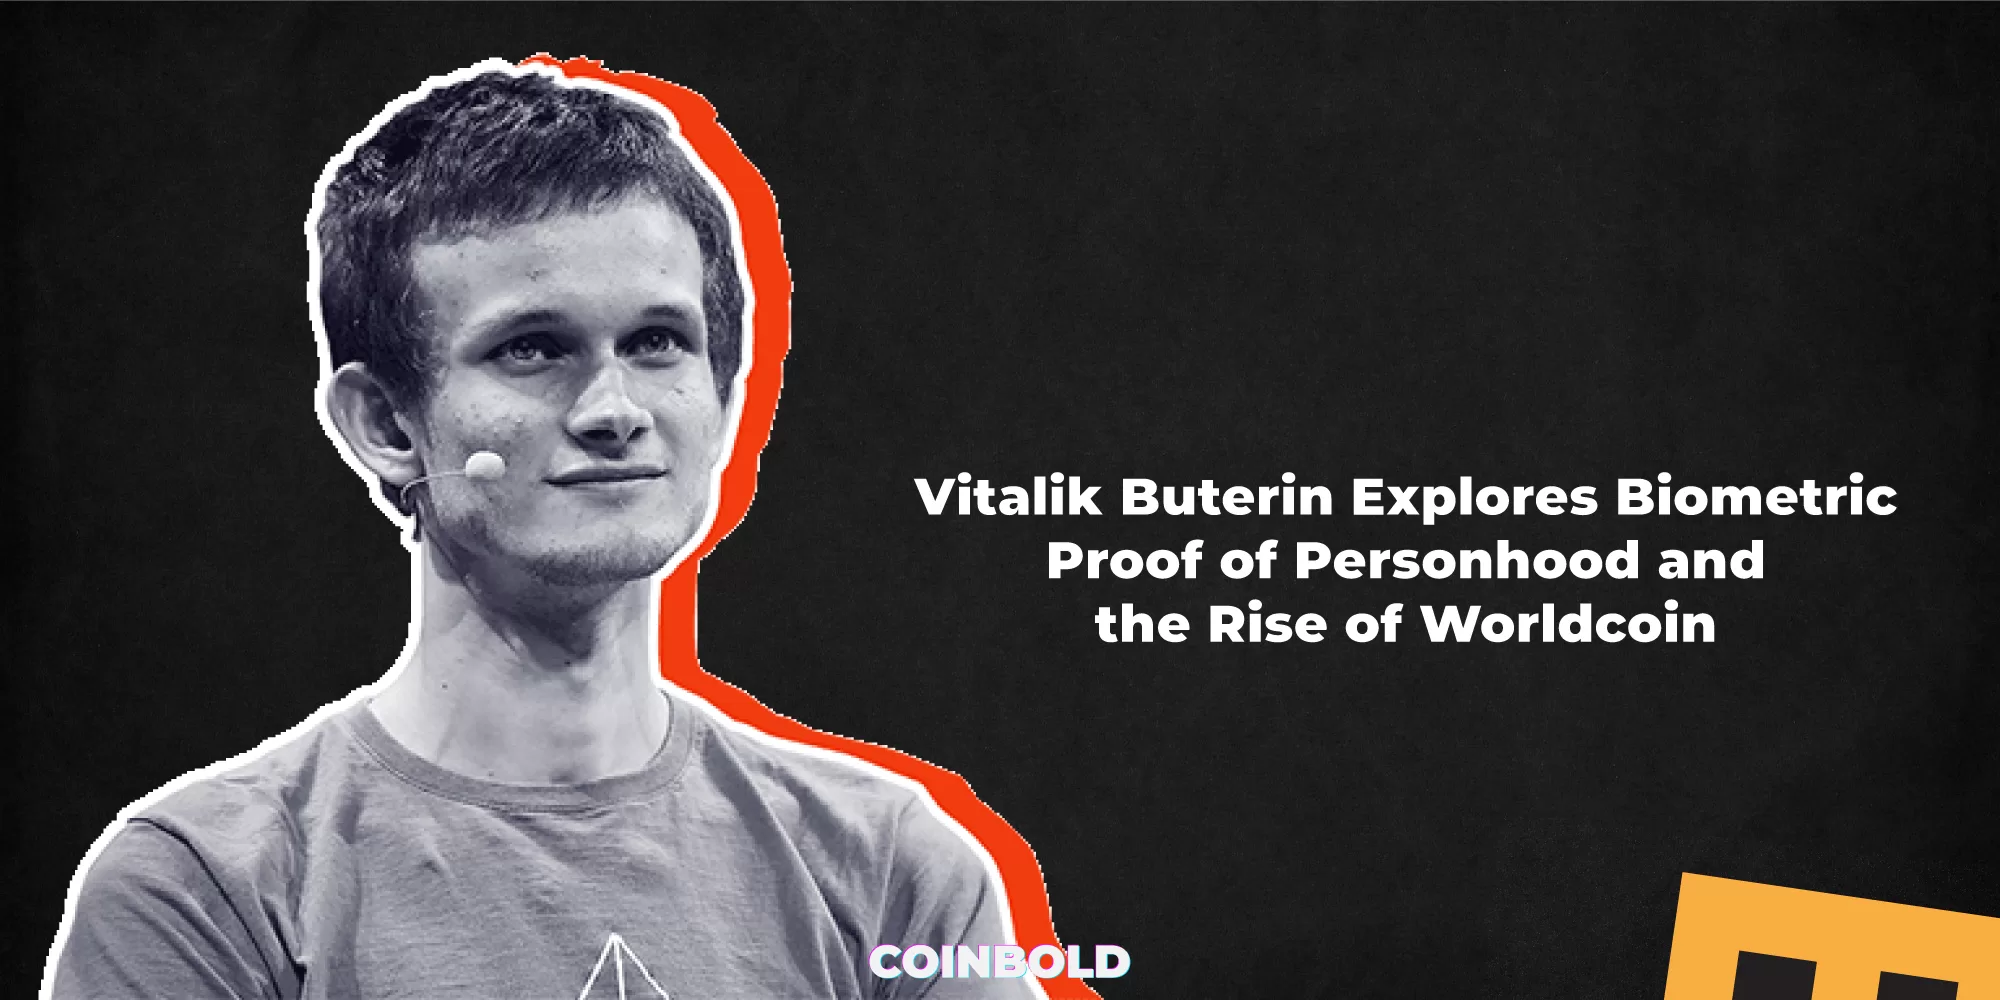 Vitalik Buterin Explores Biometric Proof of Personhood and the Rise of Worldcoin